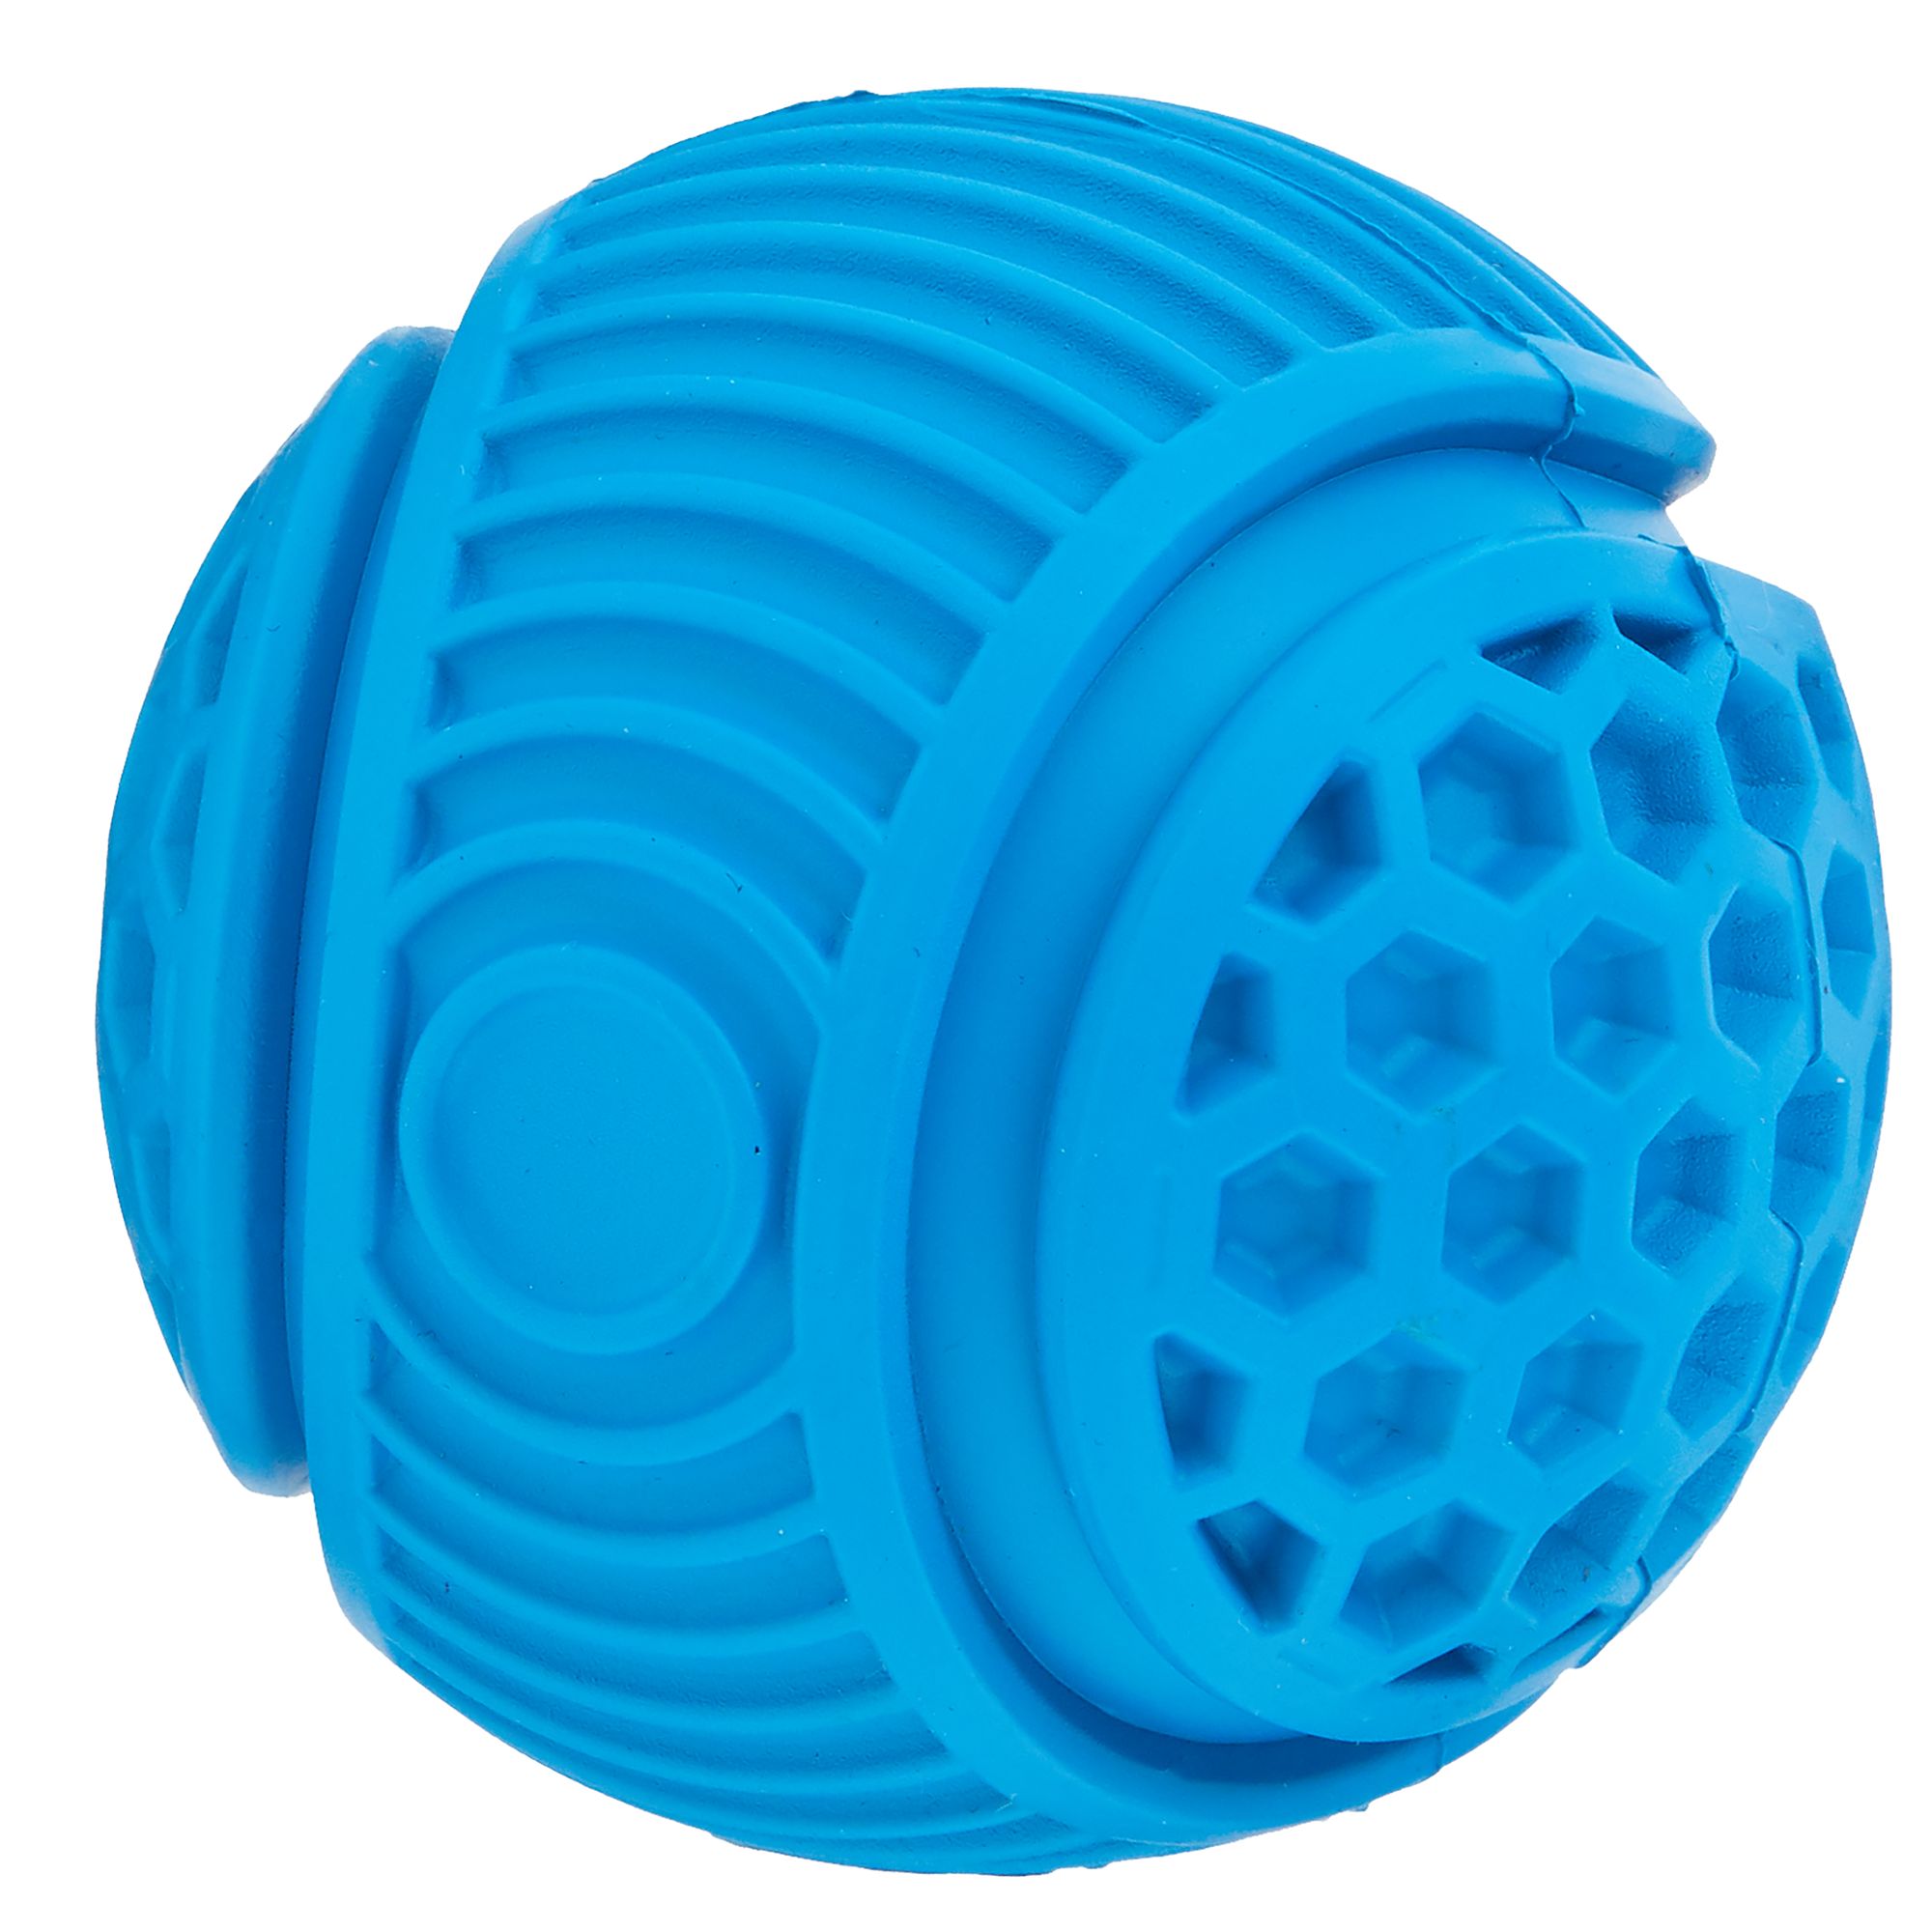 active ball for dogs